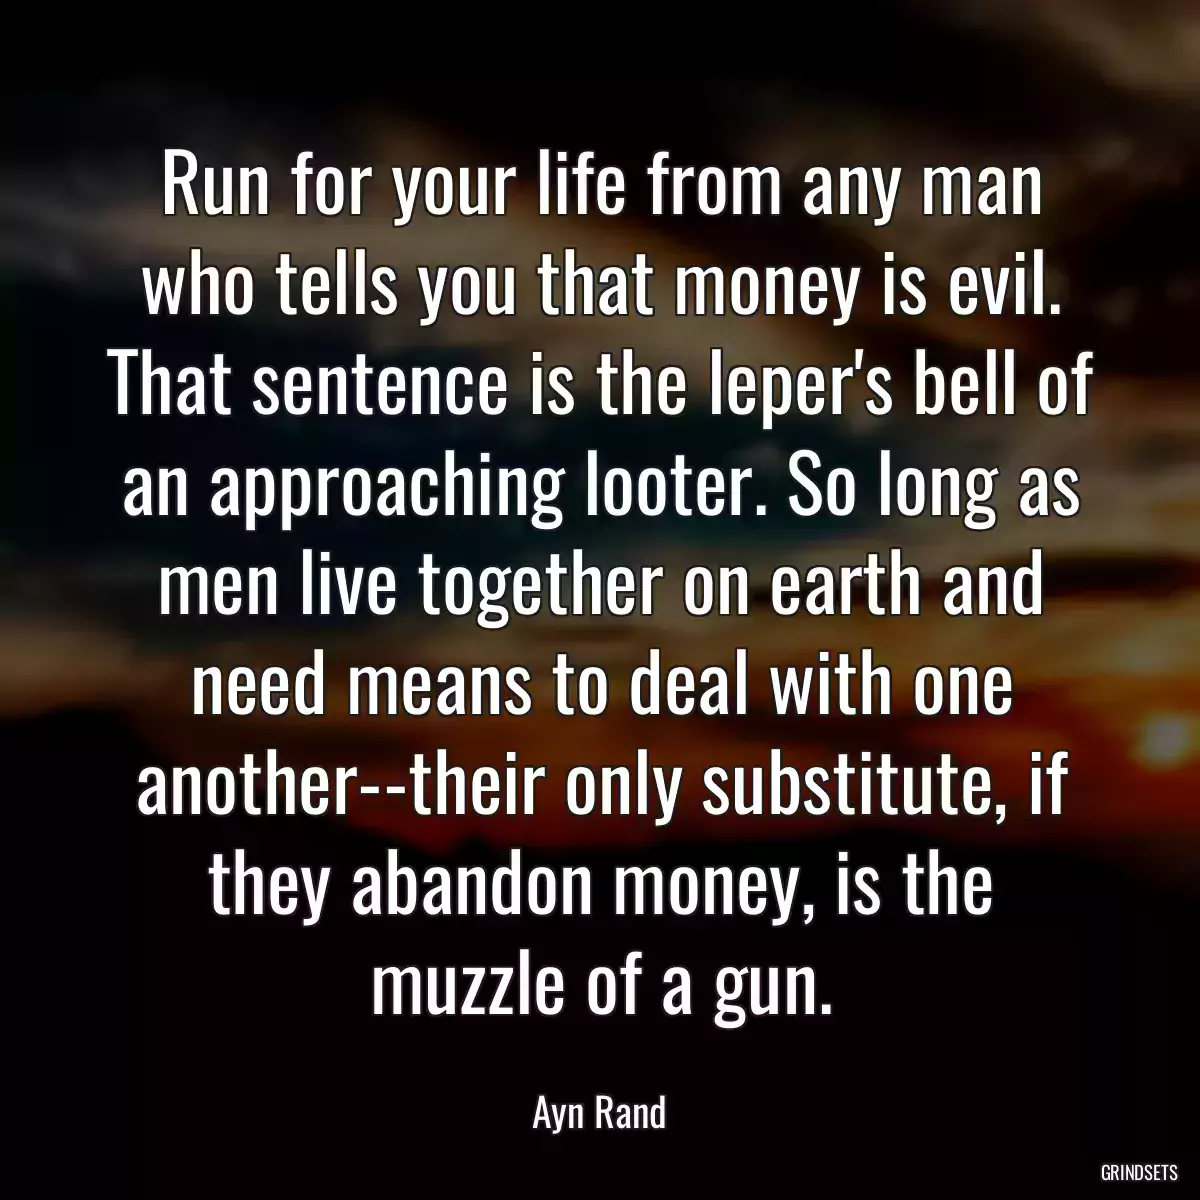 Run for your life from any man who tells you that money is evil. That sentence is the leper\'s bell of an approaching looter. So long as men live together on earth and need means to deal with one another--their only substitute, if they abandon money, is the muzzle of a gun.